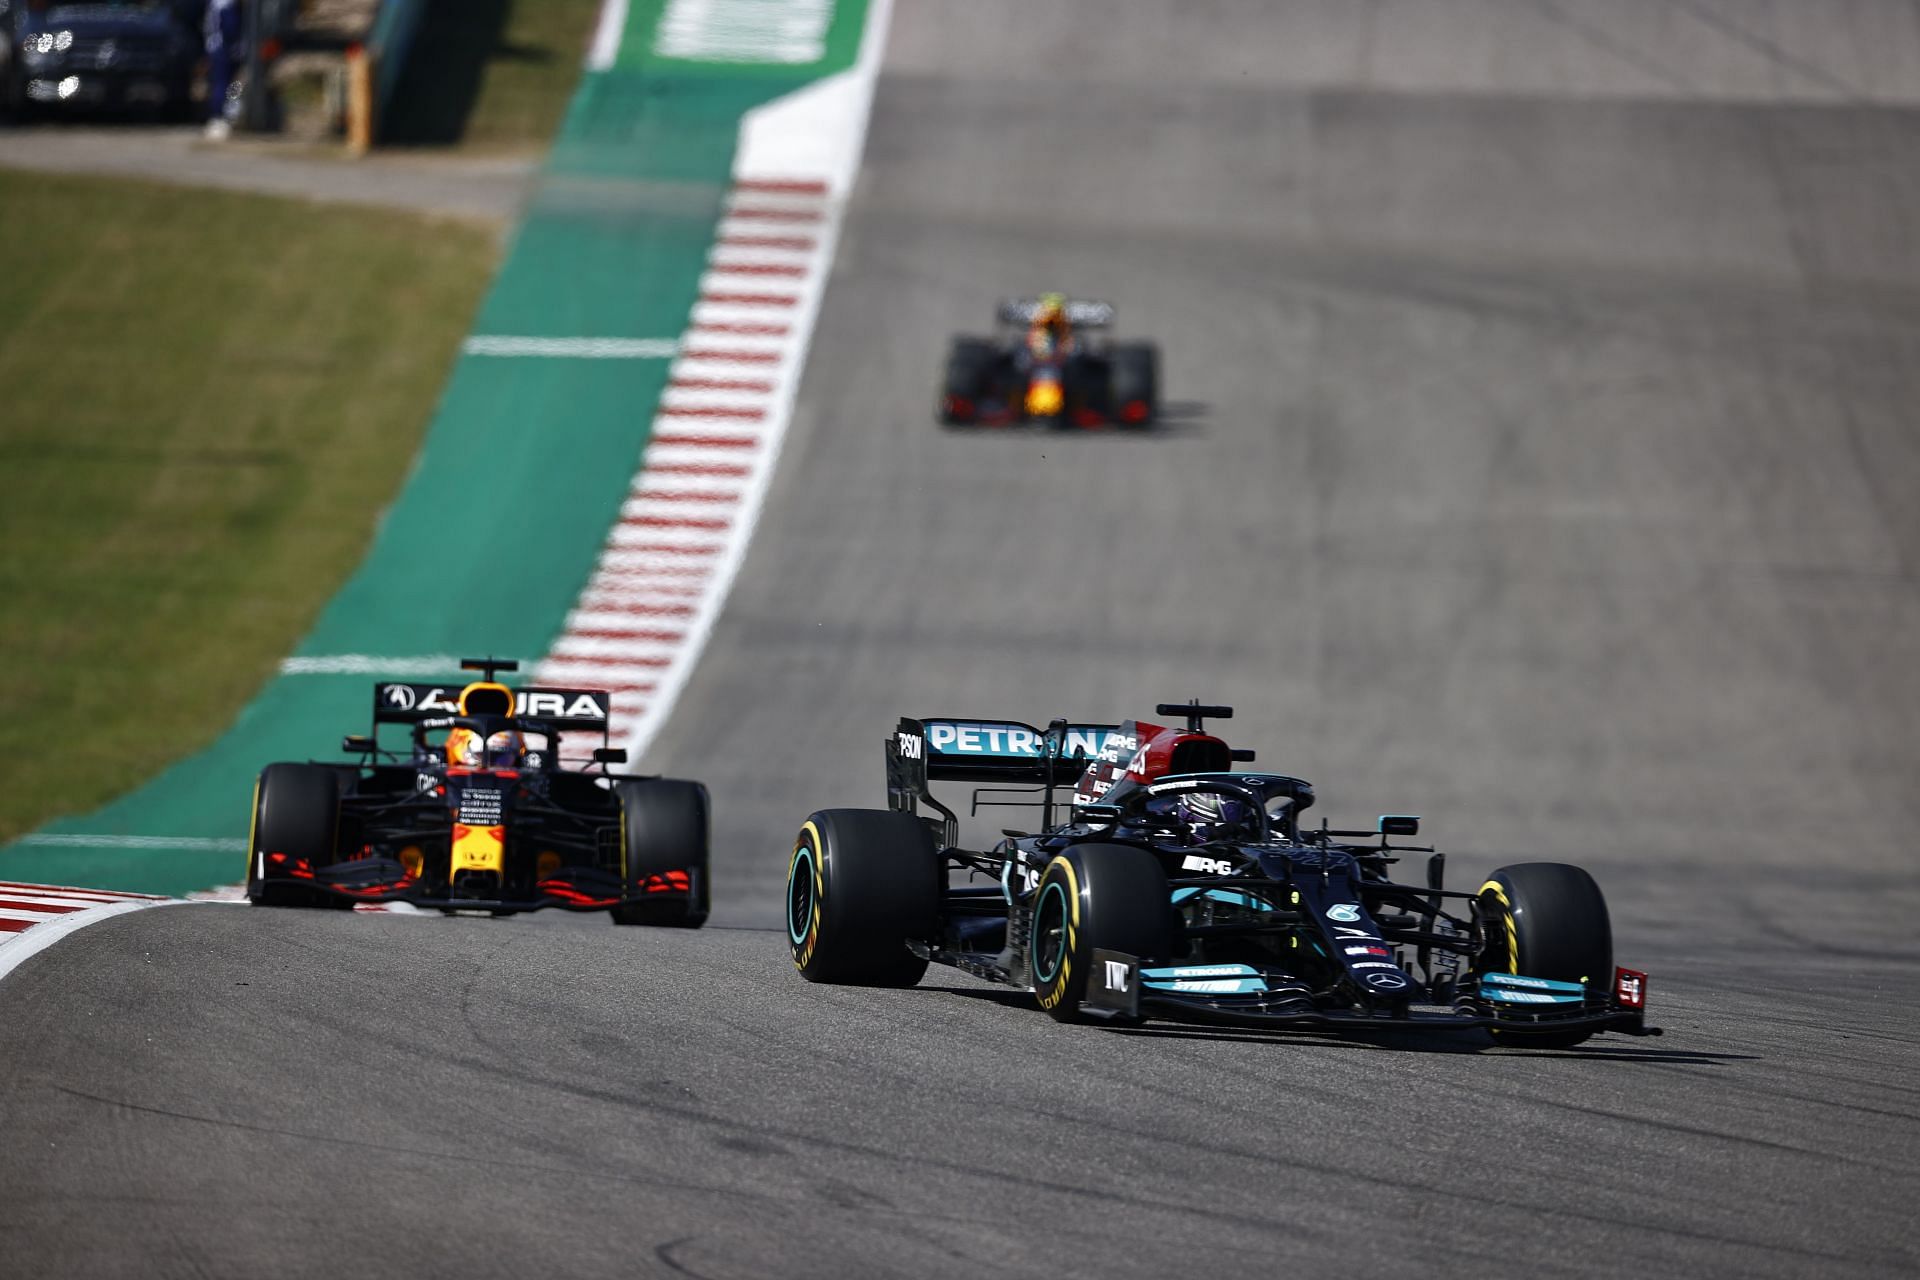 Lewis Hamilton leads Max Verstappen during 2021 USGP in Austin, Texas. (Photo by Jared C. Tilton/Getty Images)